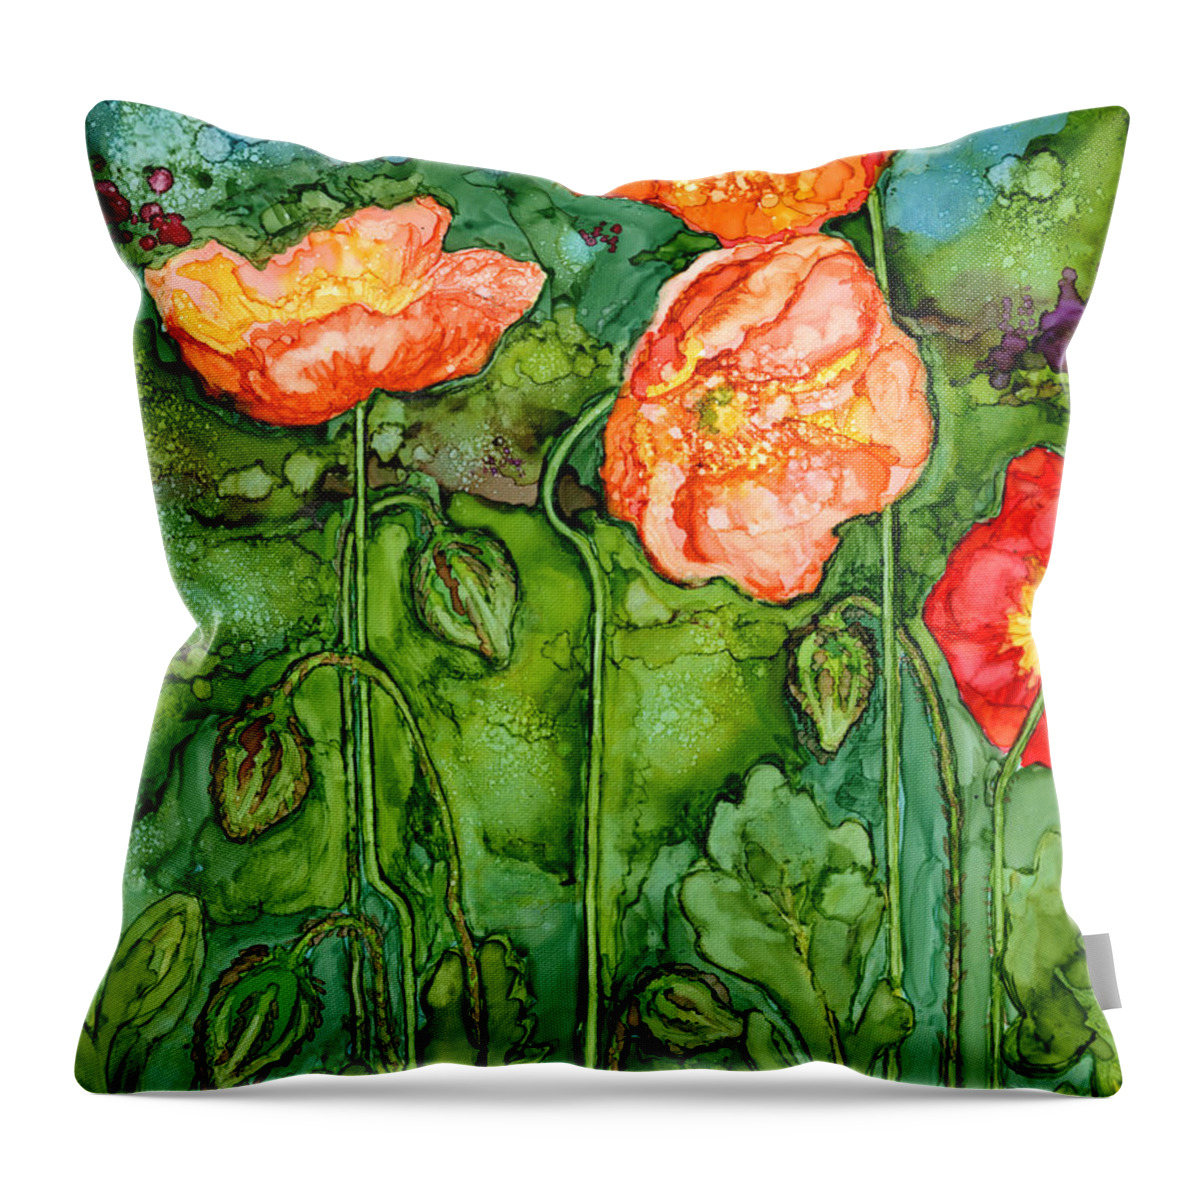 Ice Poppies Throw Pillow featuring the painting Ice Poppies I by Vicki Baun Barry